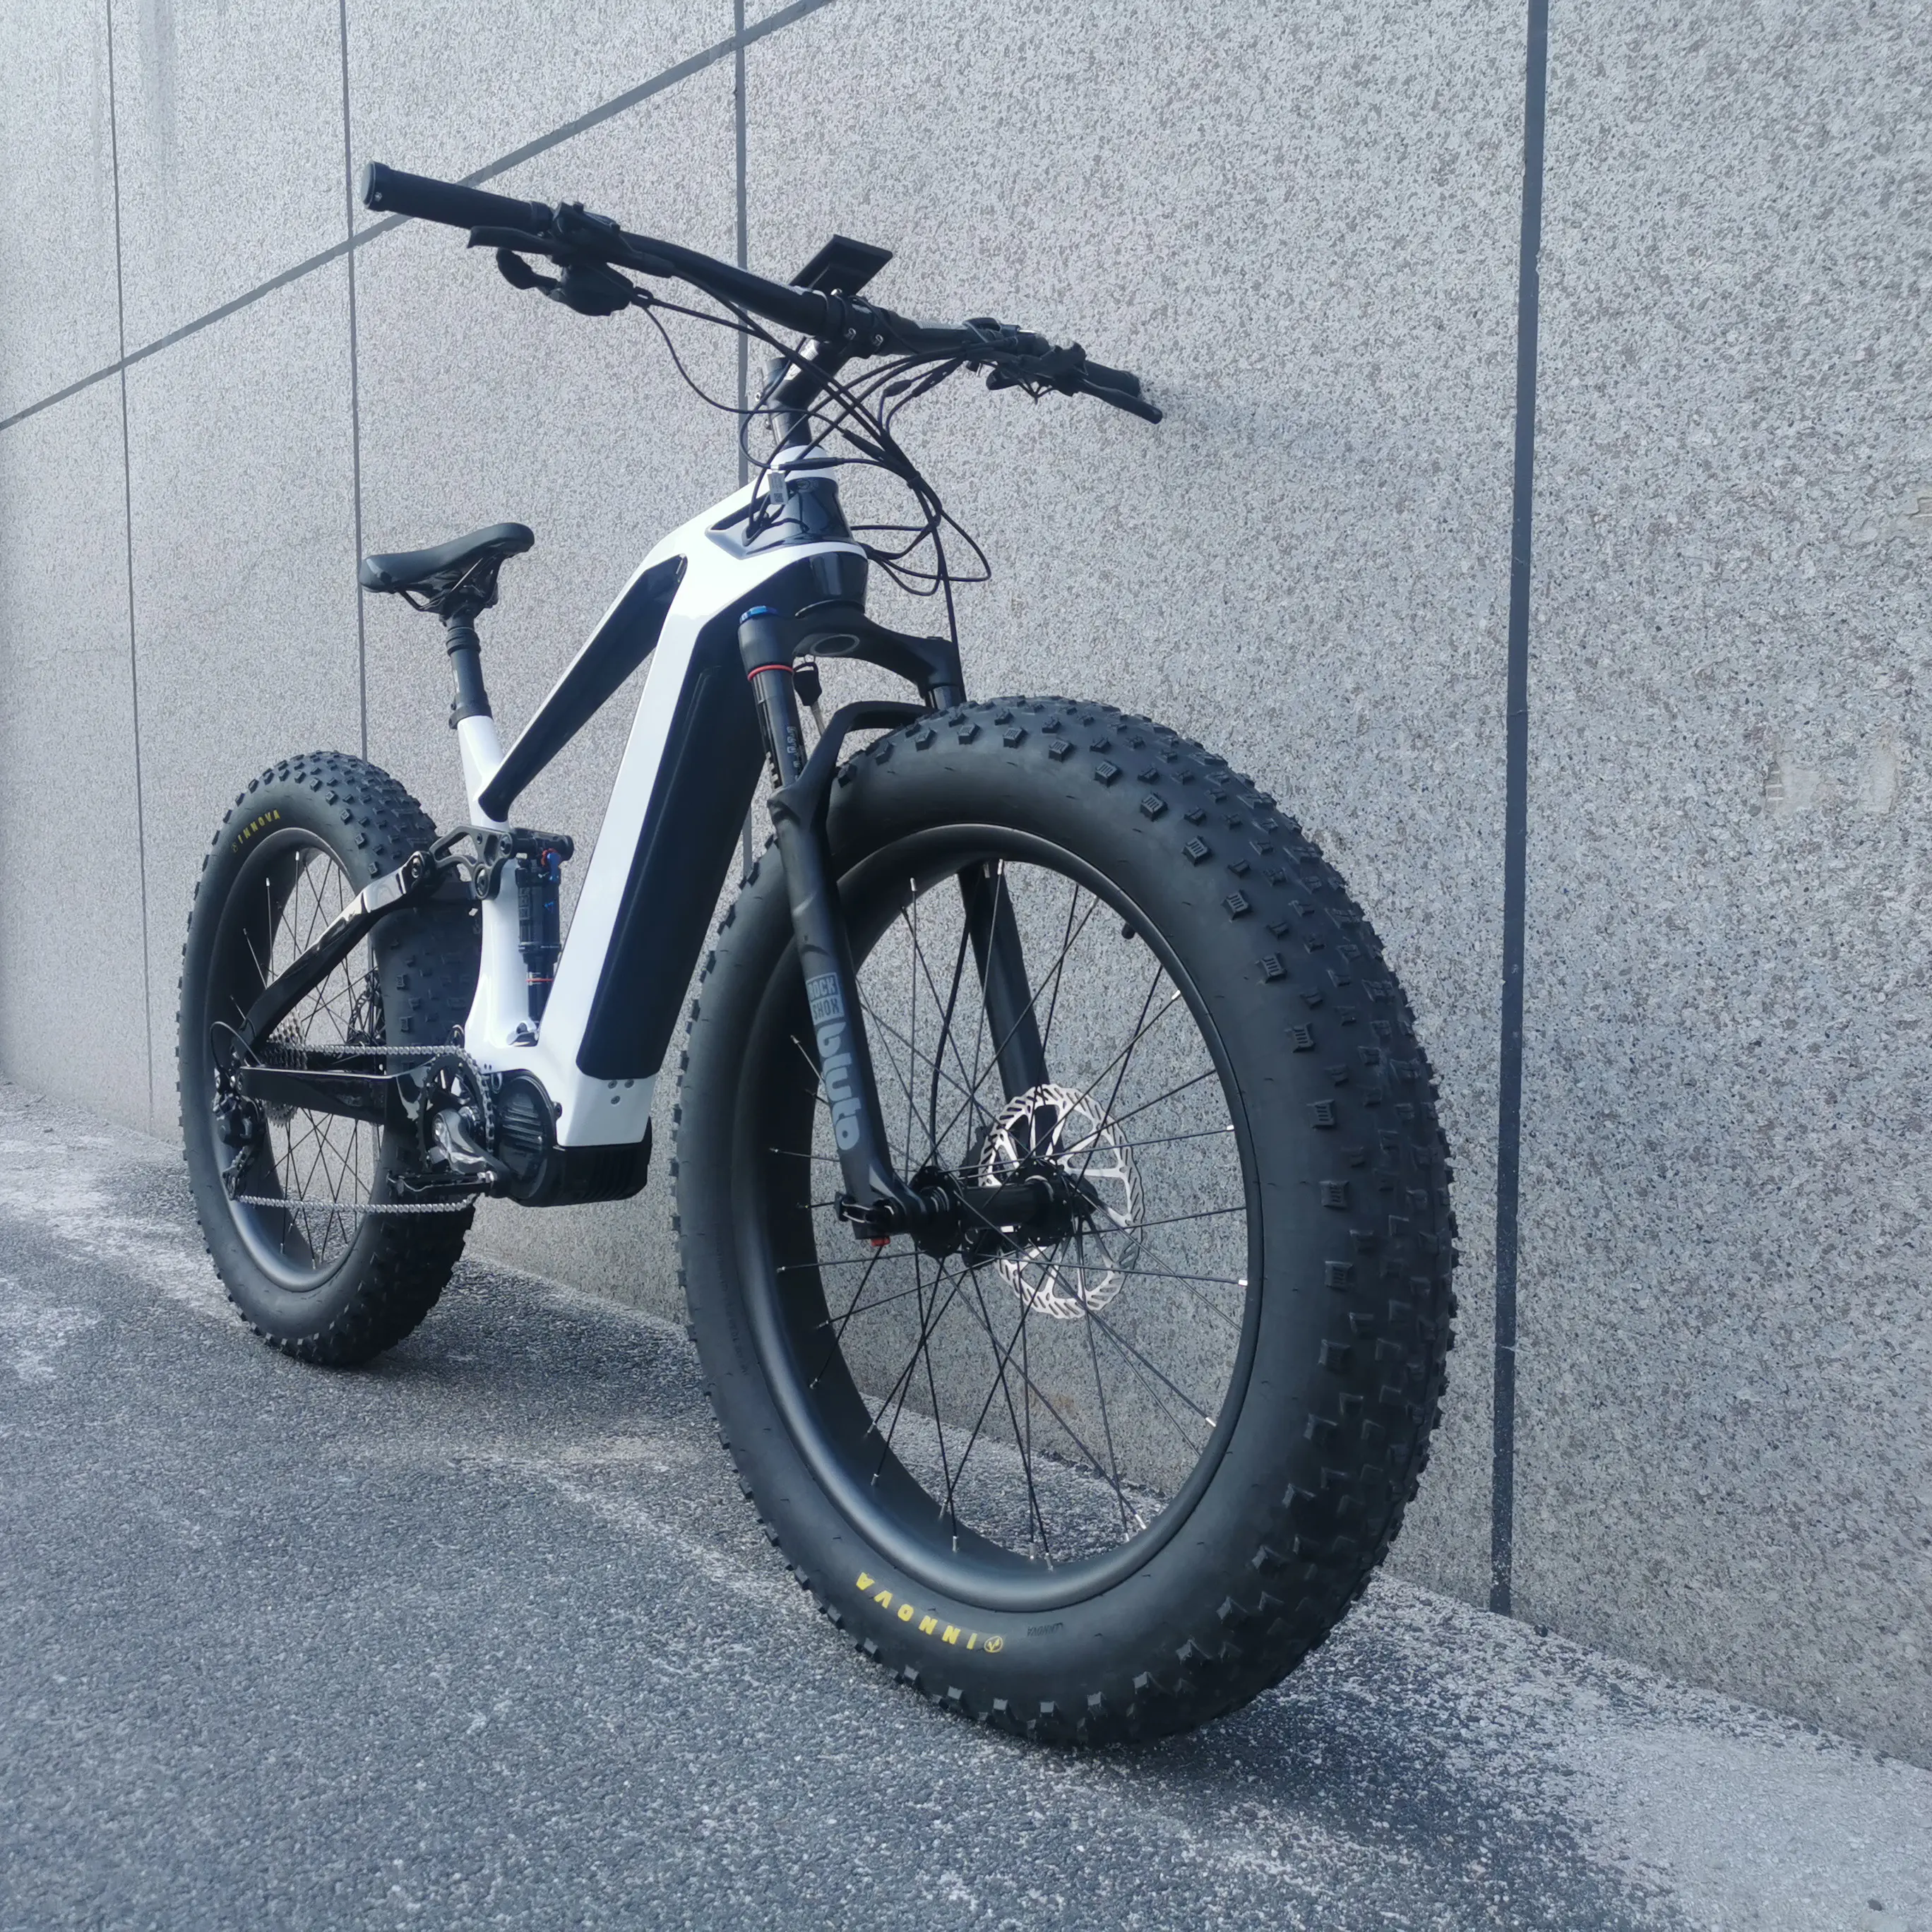 Newstyle Fat Tire Electric Bike 1000W Bafang Central Motor ULTRA G510 Fat Bike 1000W Full Suspension Electric Bicycle 1000W